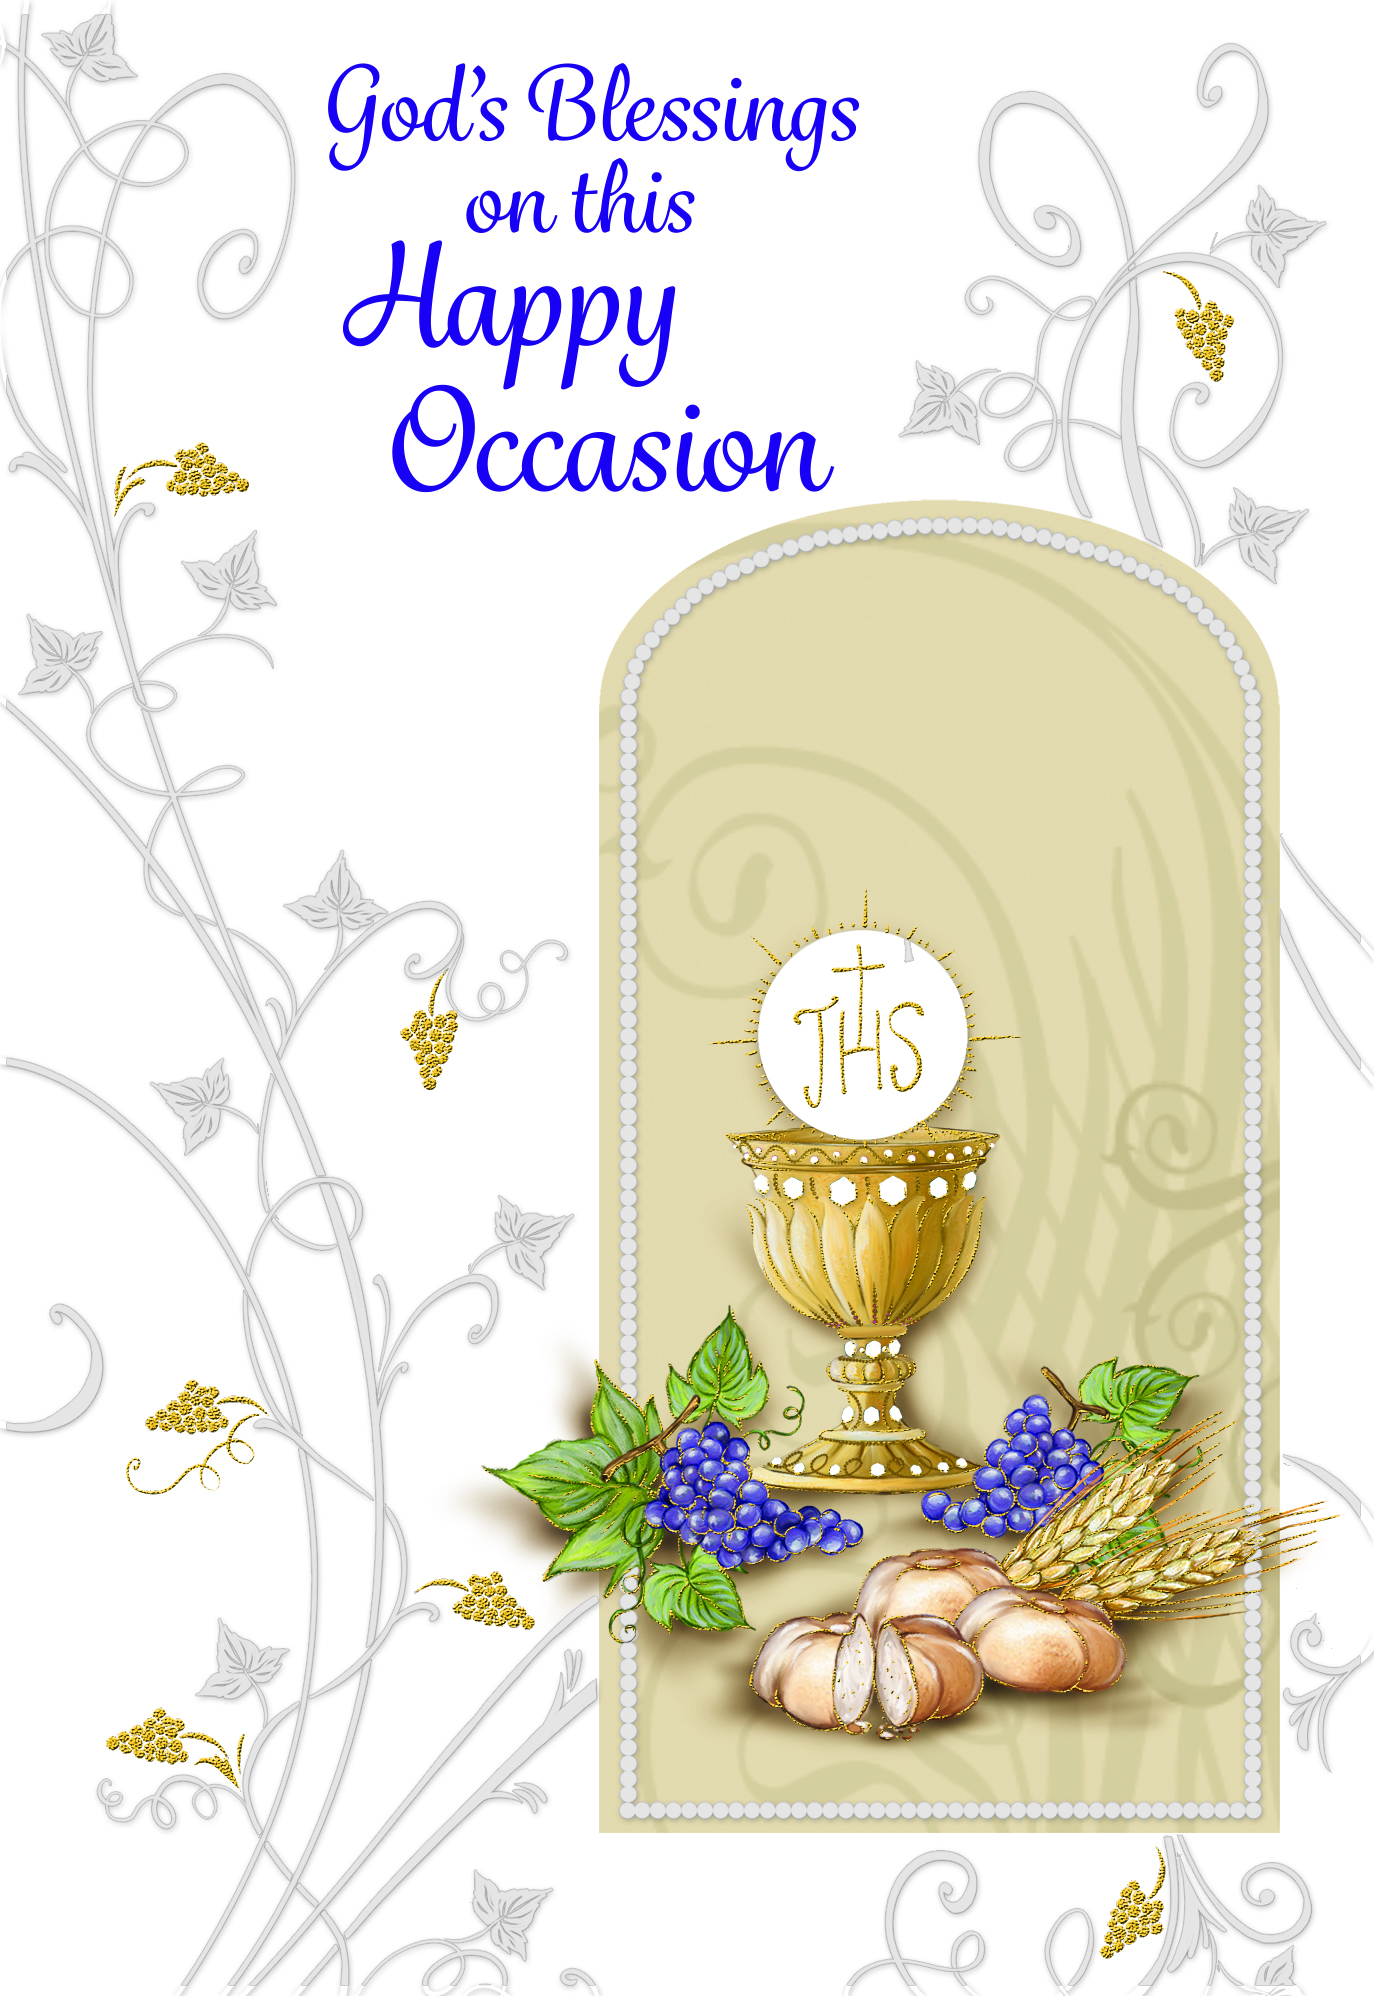 86935 happy occasion - 4 5/8 x 6 3/4 - gold foil decoration & embossed